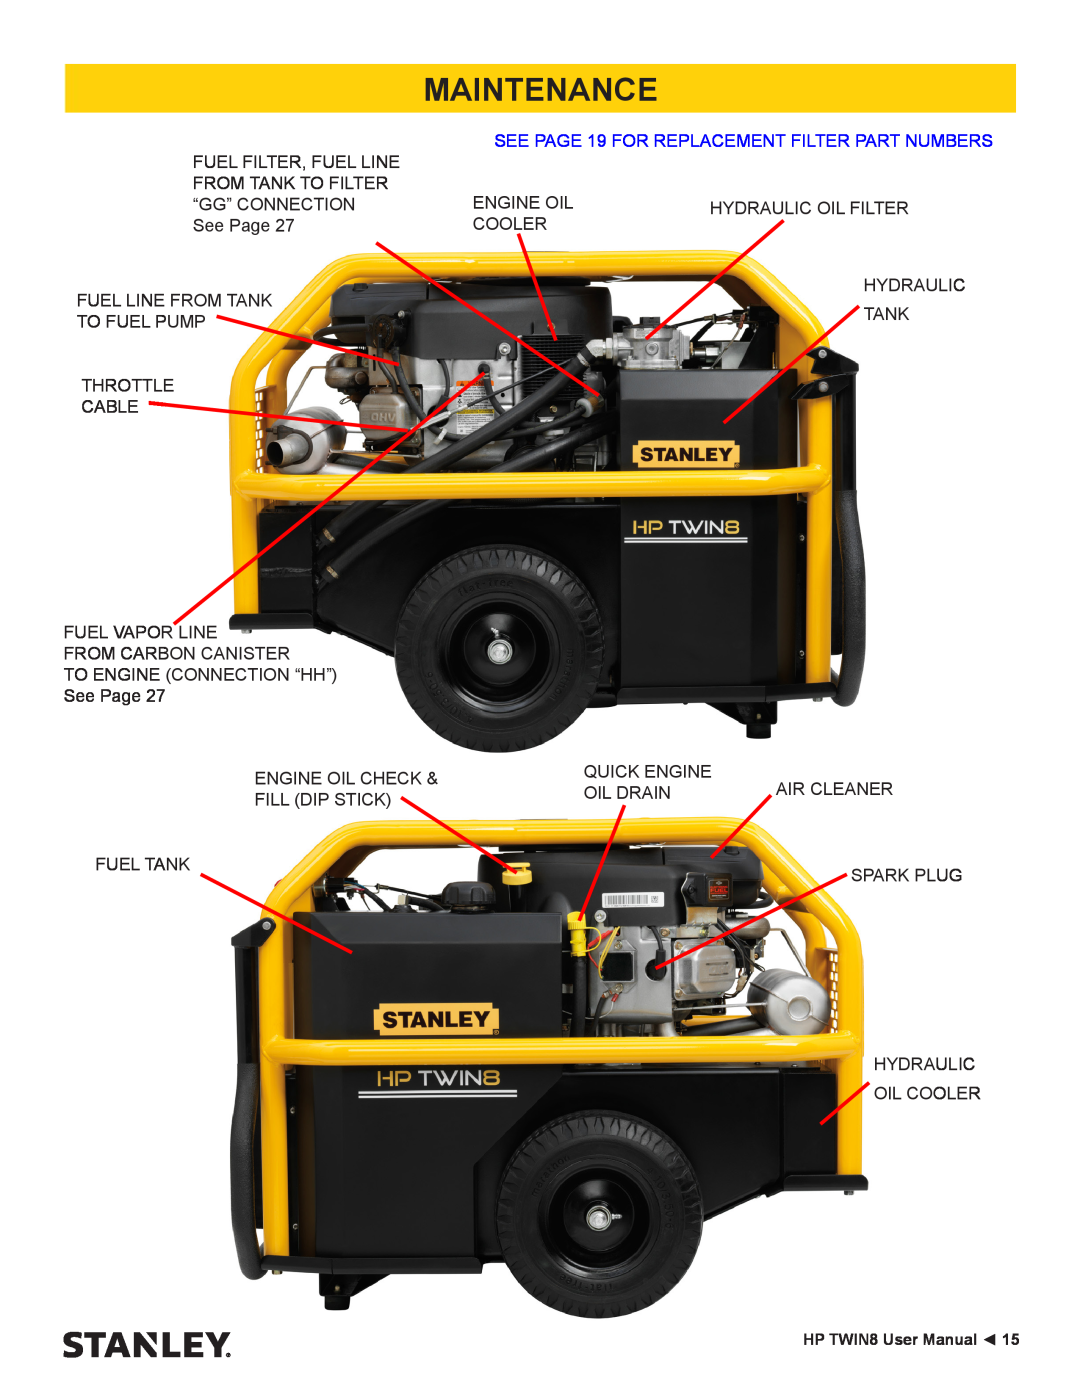 Stanley Black & Decker HP TWIN8 manual Maintenance, FUEL FILTER, FUEL LINE FROM TANK TO FILTER “GG” CONNECTION See Page 